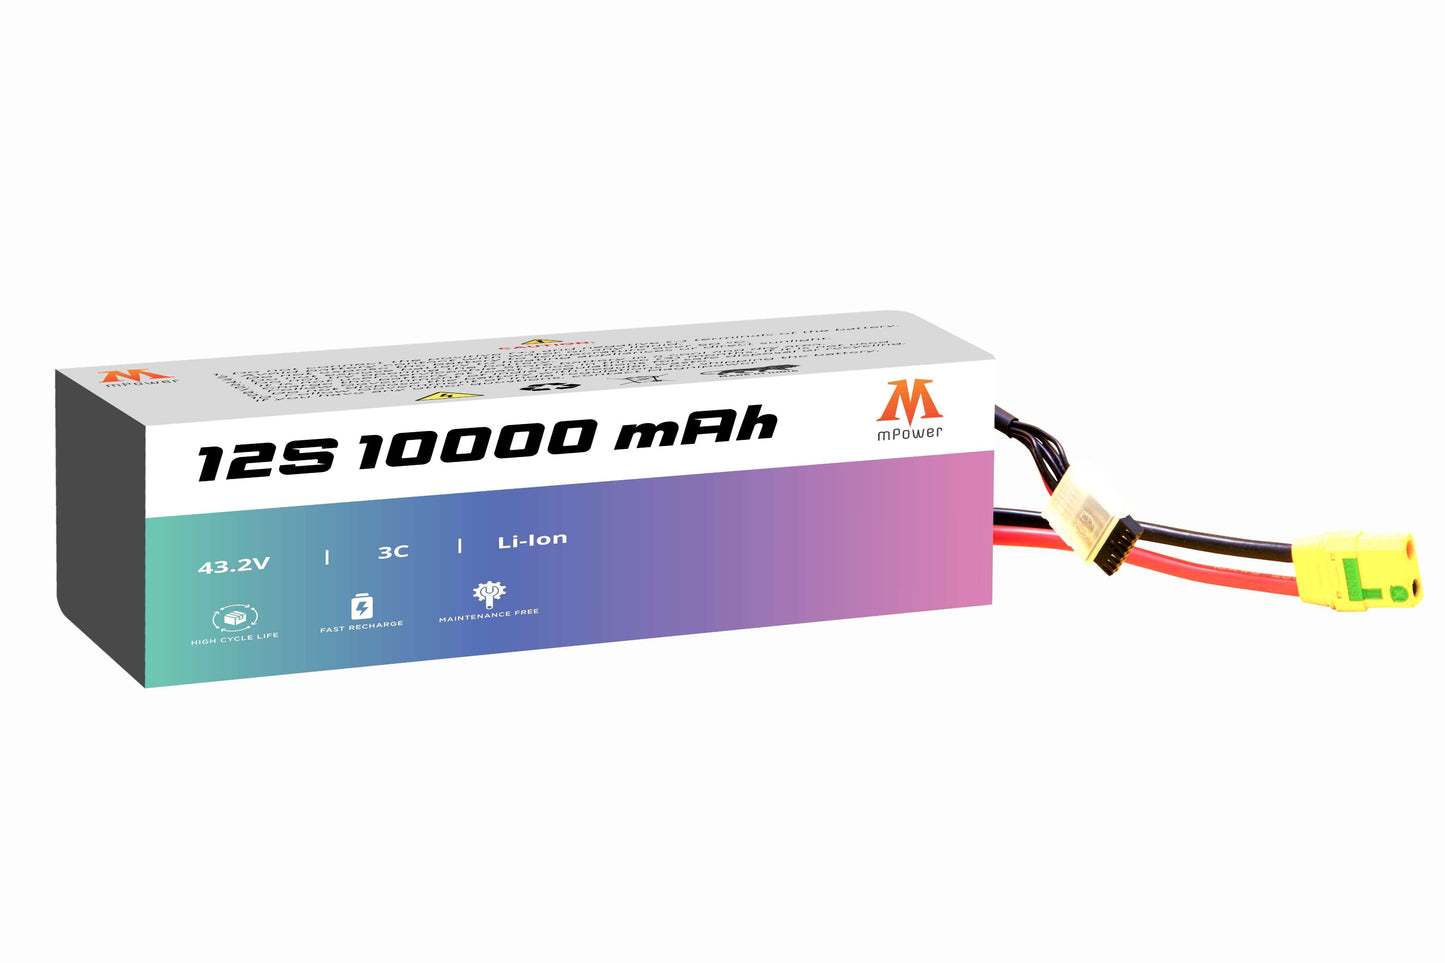 mPower 12S 10000mAh Lithium-Ion Battery for Survey Drones